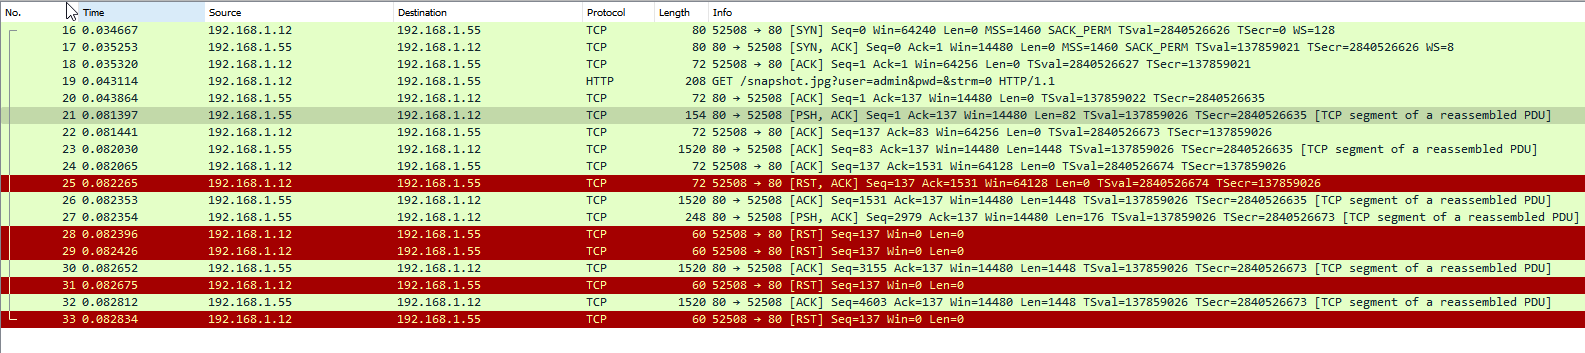 Wireshark_QdIgykmh2G.png